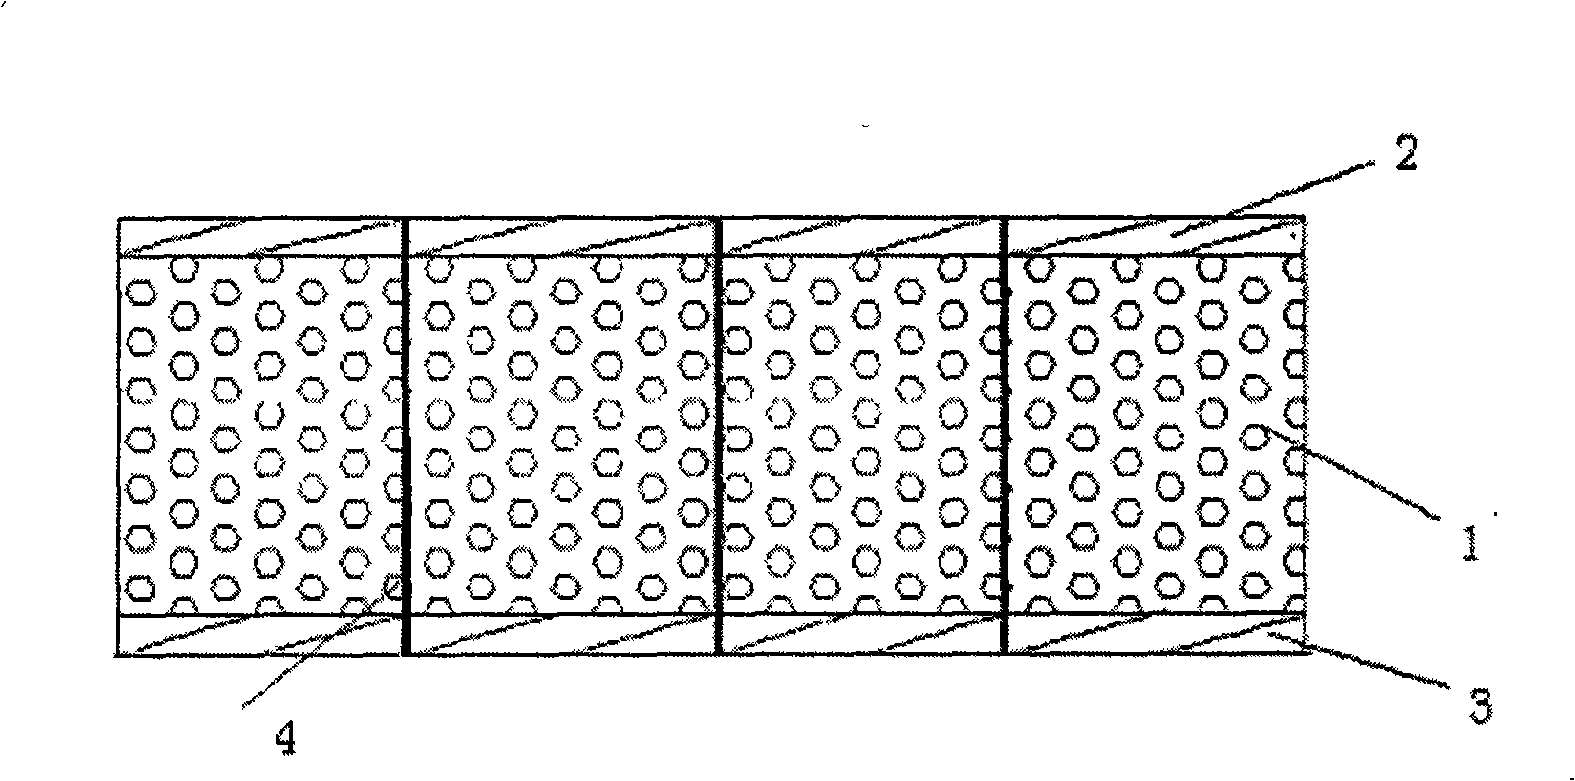 Foam sandwich extensional organization composite material and method of producing the same